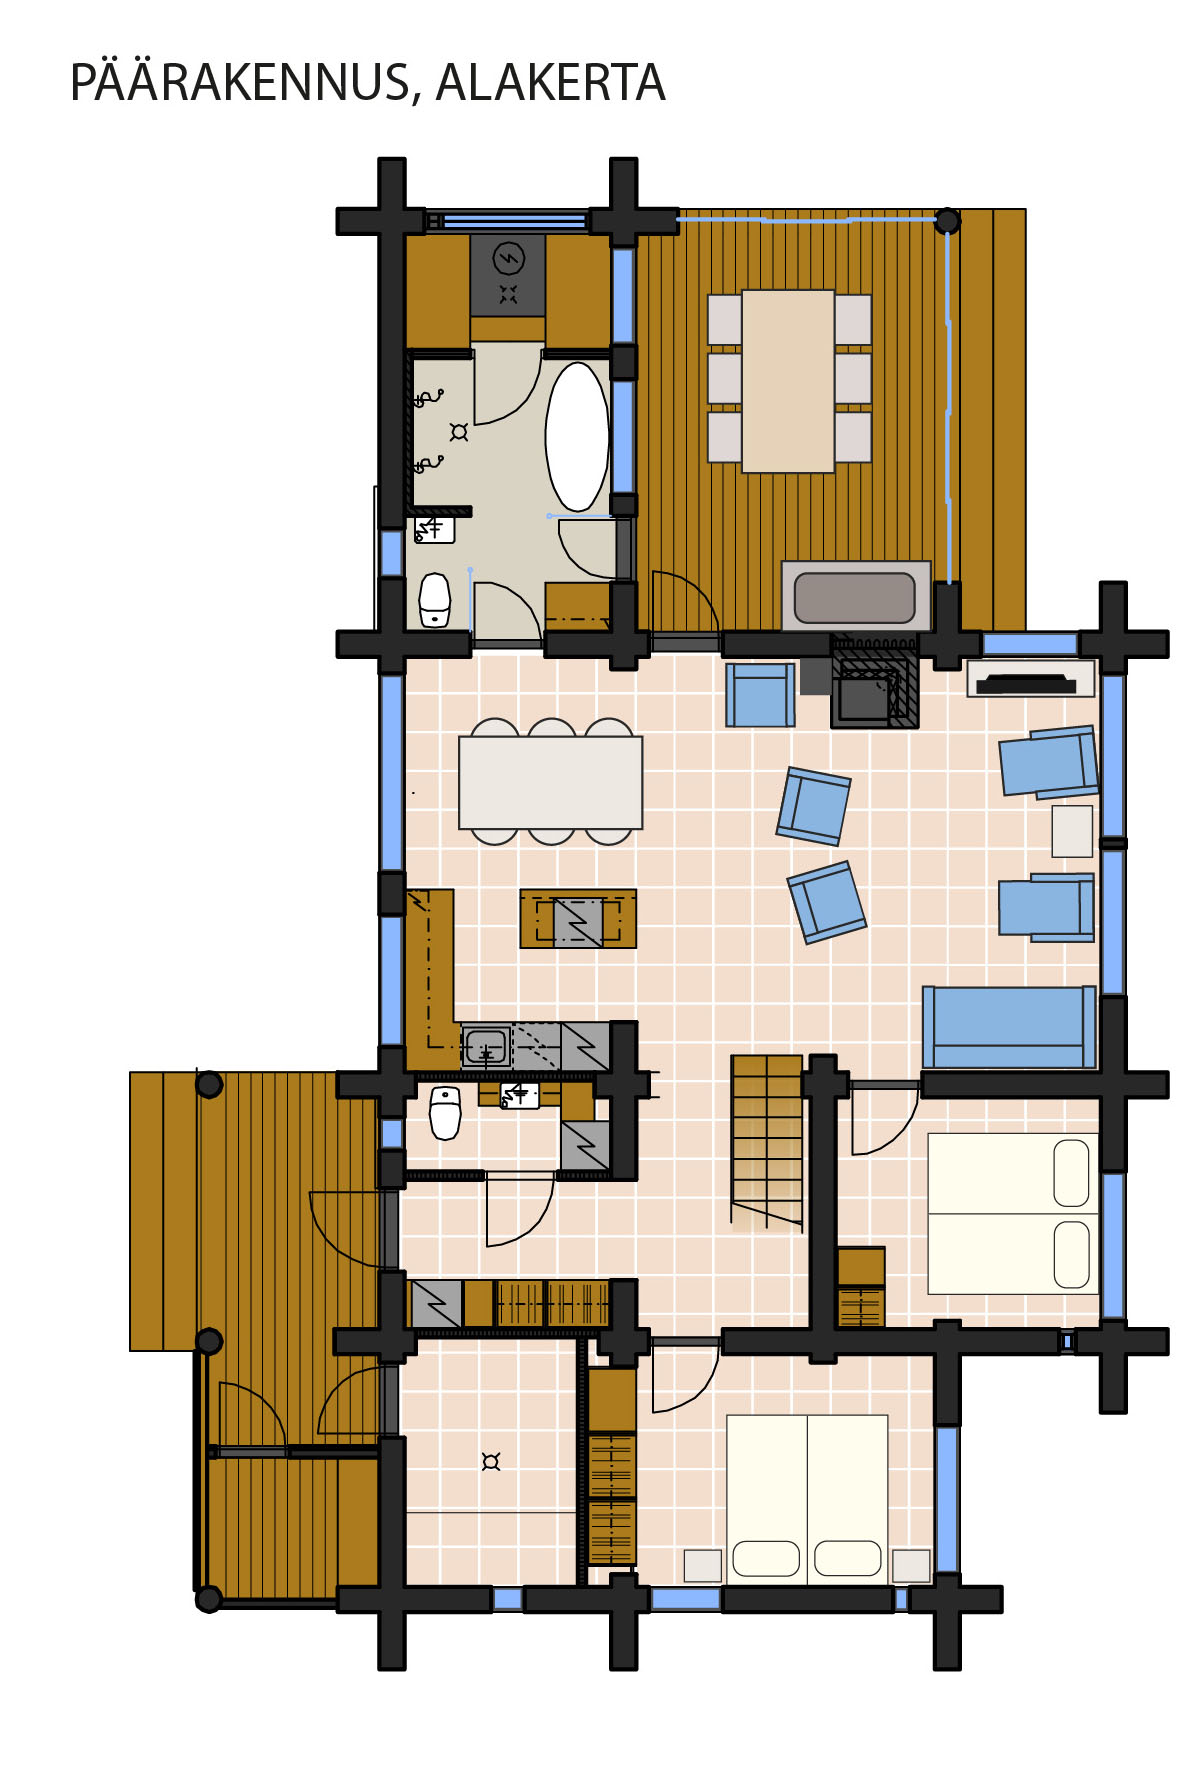 Main building Layout of 1st floor